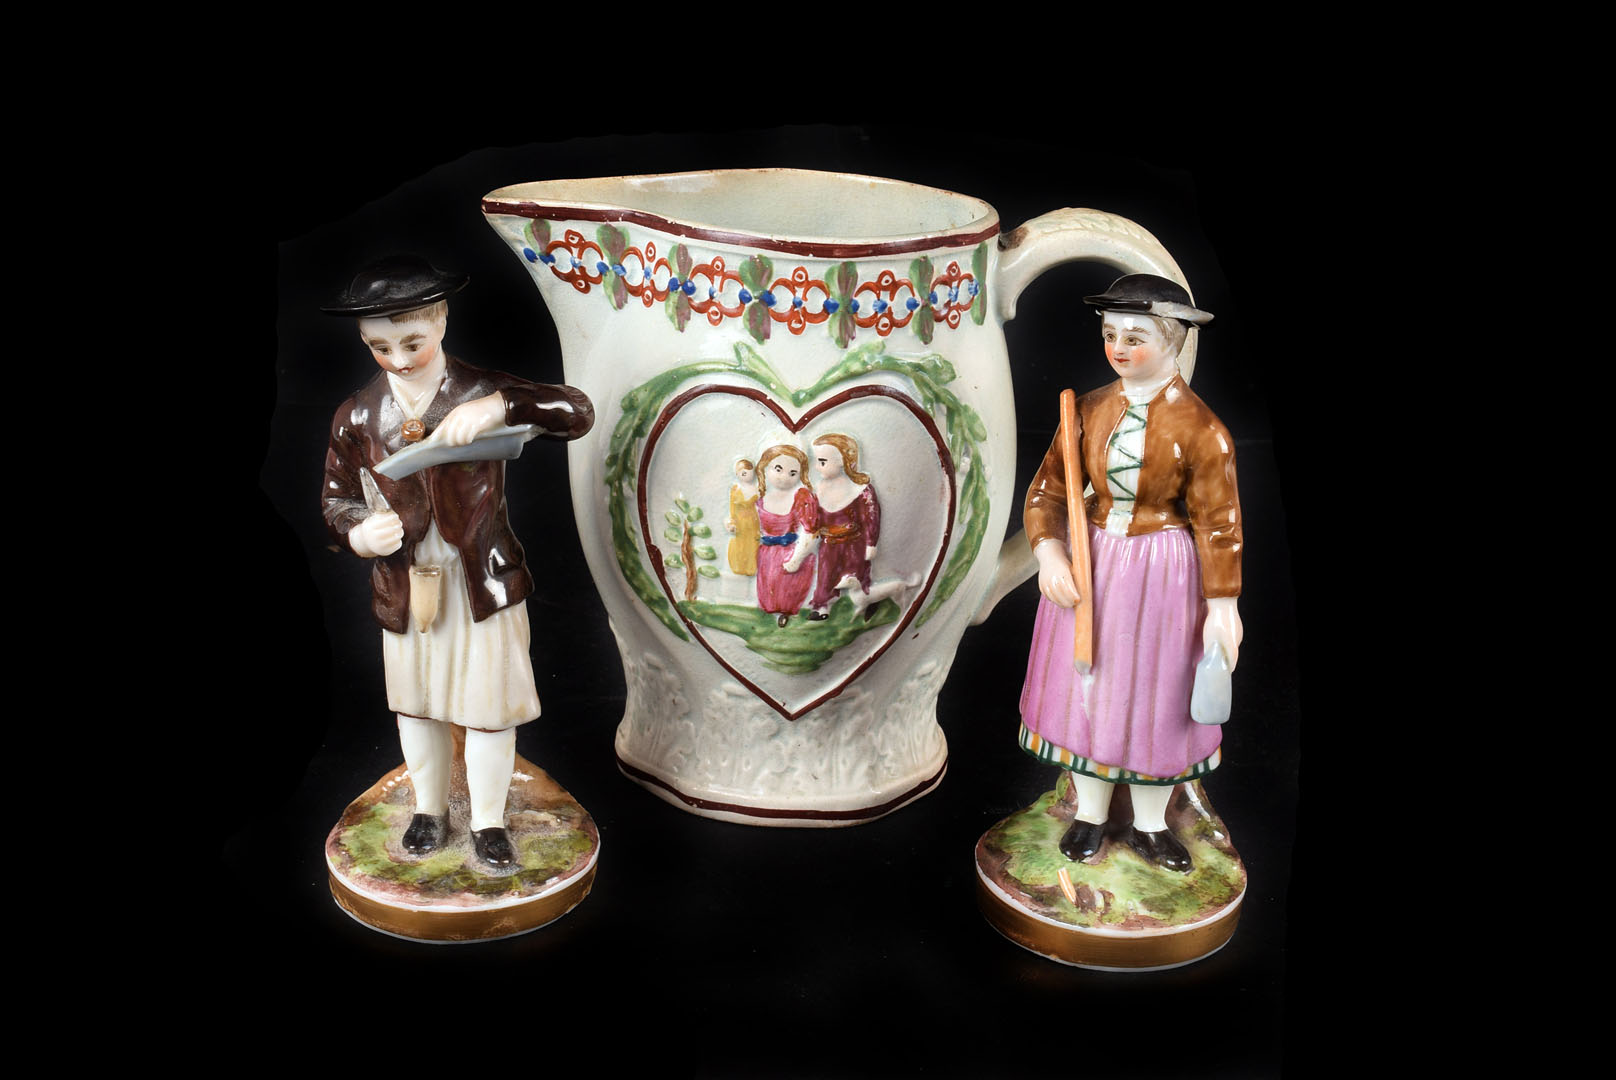 A pair of Russian porcelain figures, of a man whittling a piece of wood and a woman standing with